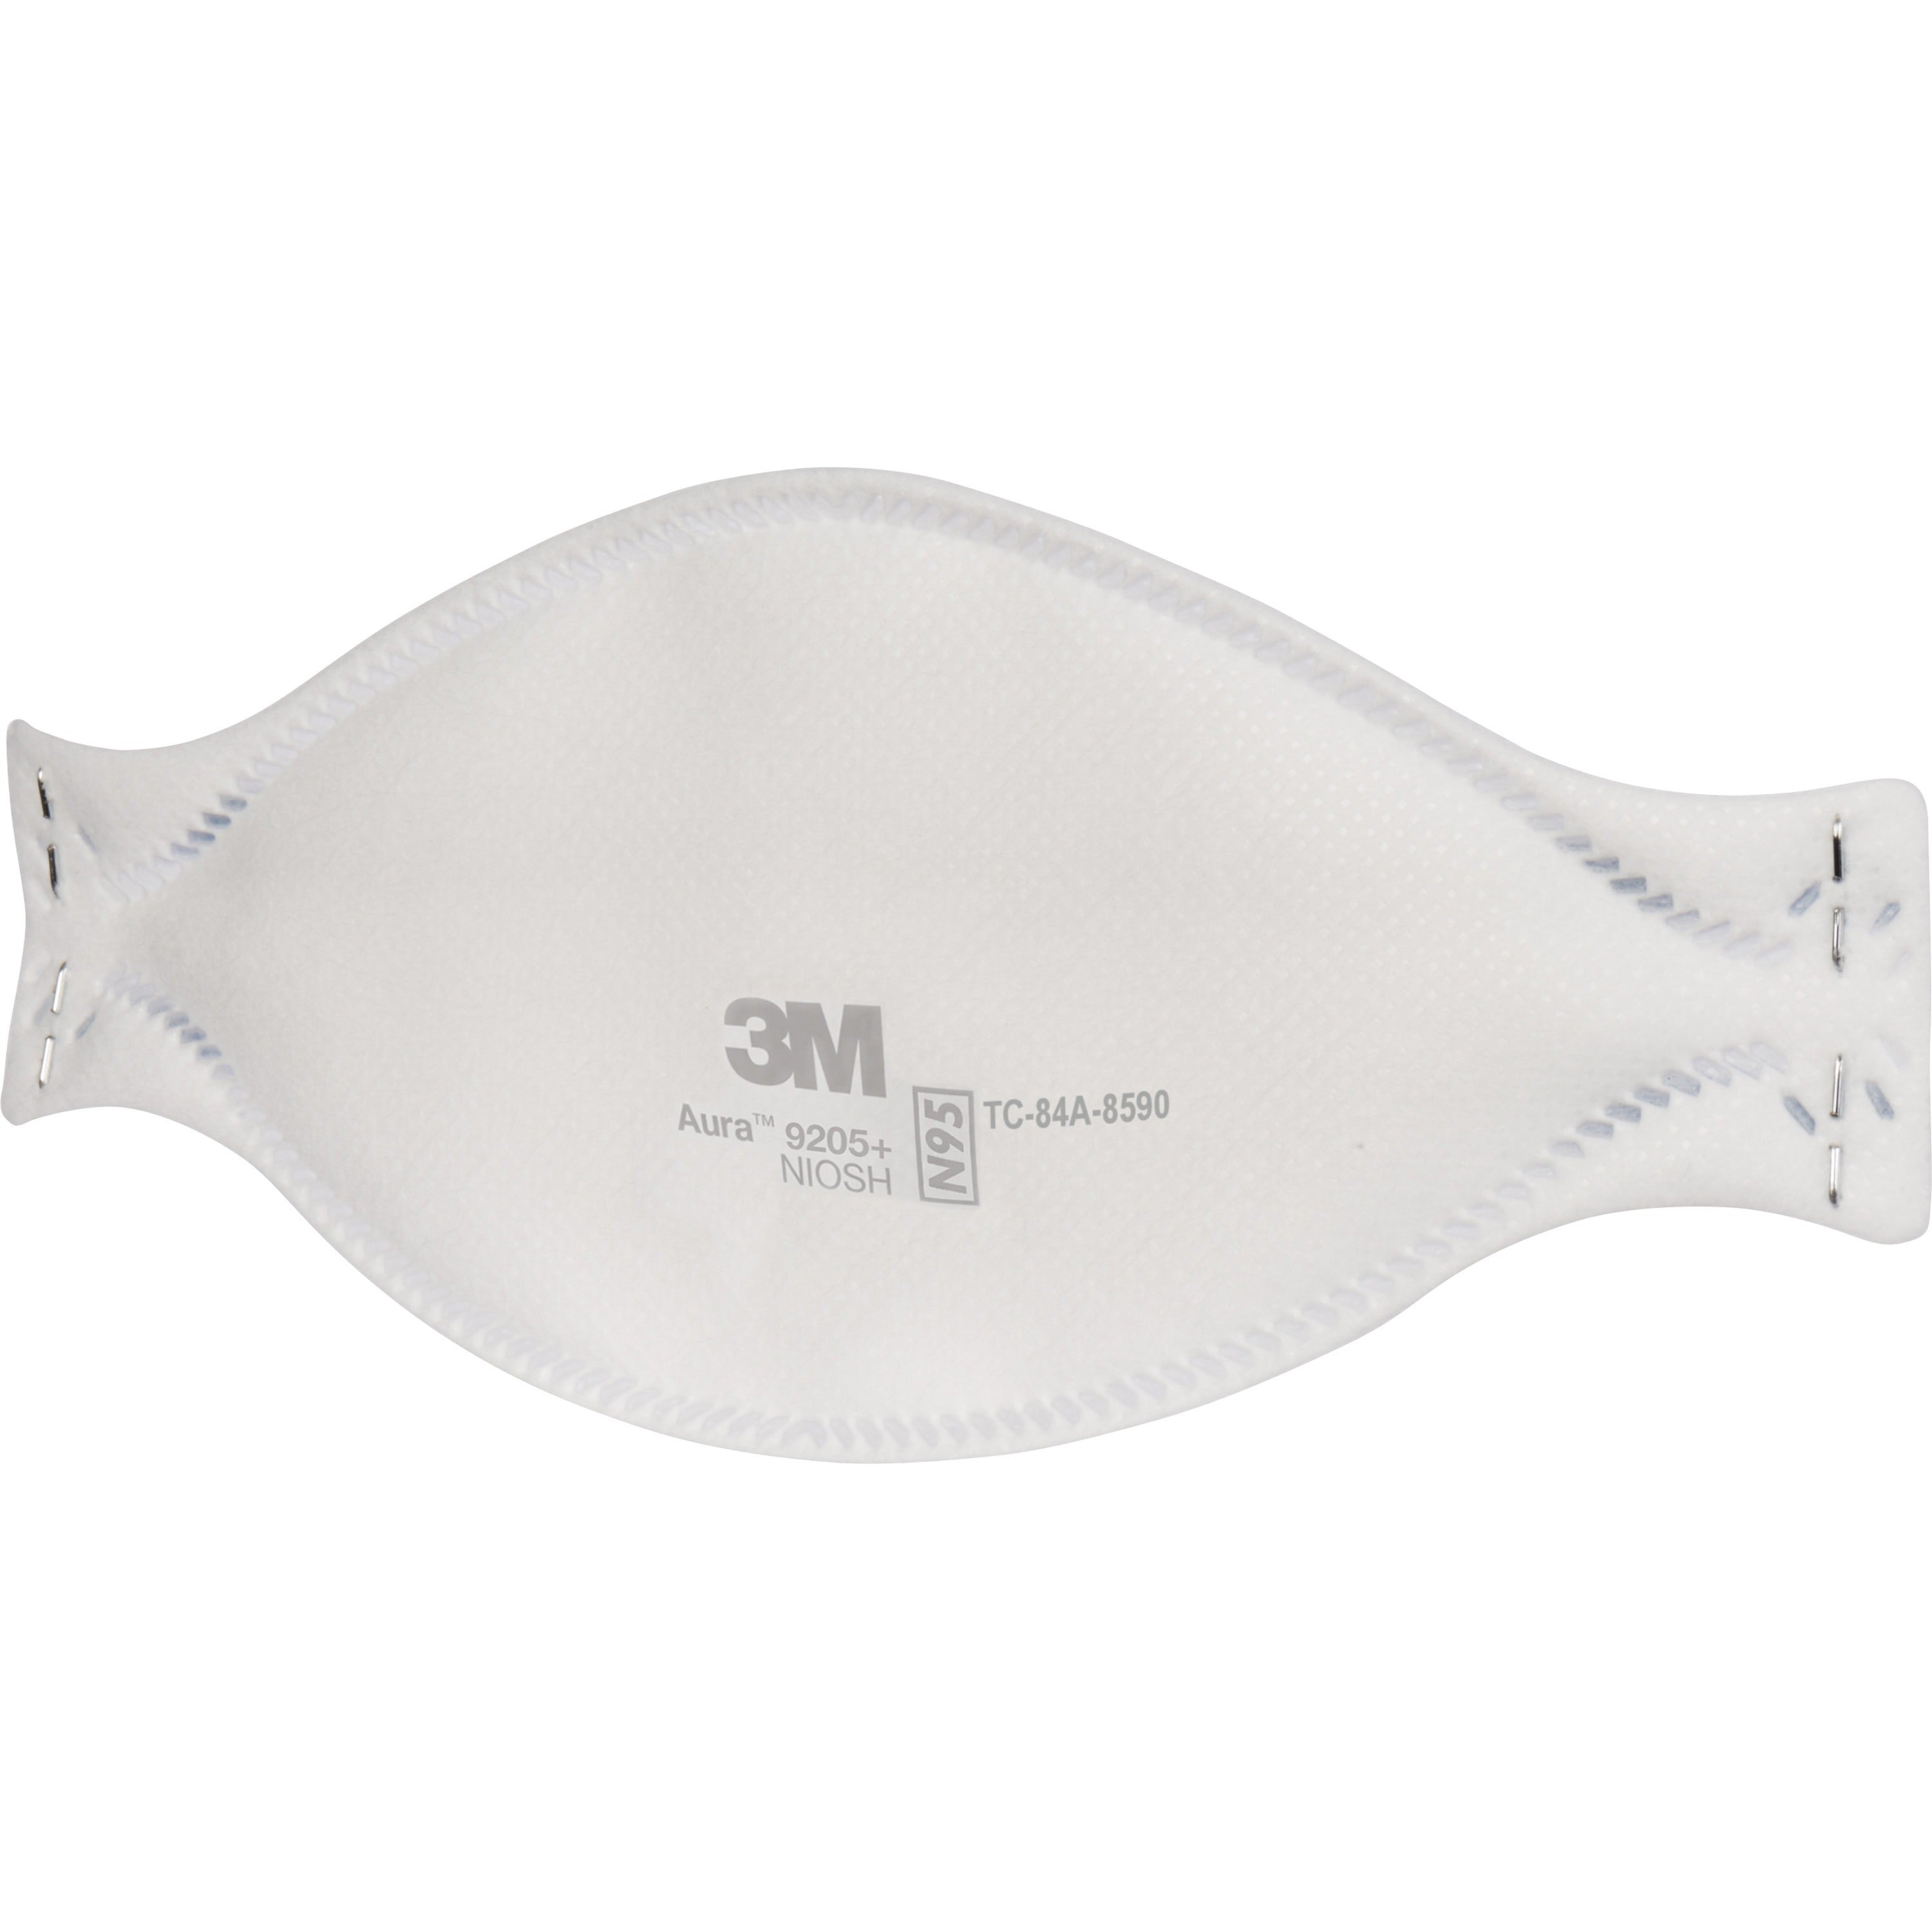 3m-aura-n95-particulate-respirator-9205-recommended-for-face-adult-size-airborne-particle-dust-contaminant-fog-protection-white-lightweight-soft-comfortable-adjustable-nose-clip-disposable-advanced-electret-media-10-pack_mmm9205p10dc - 2